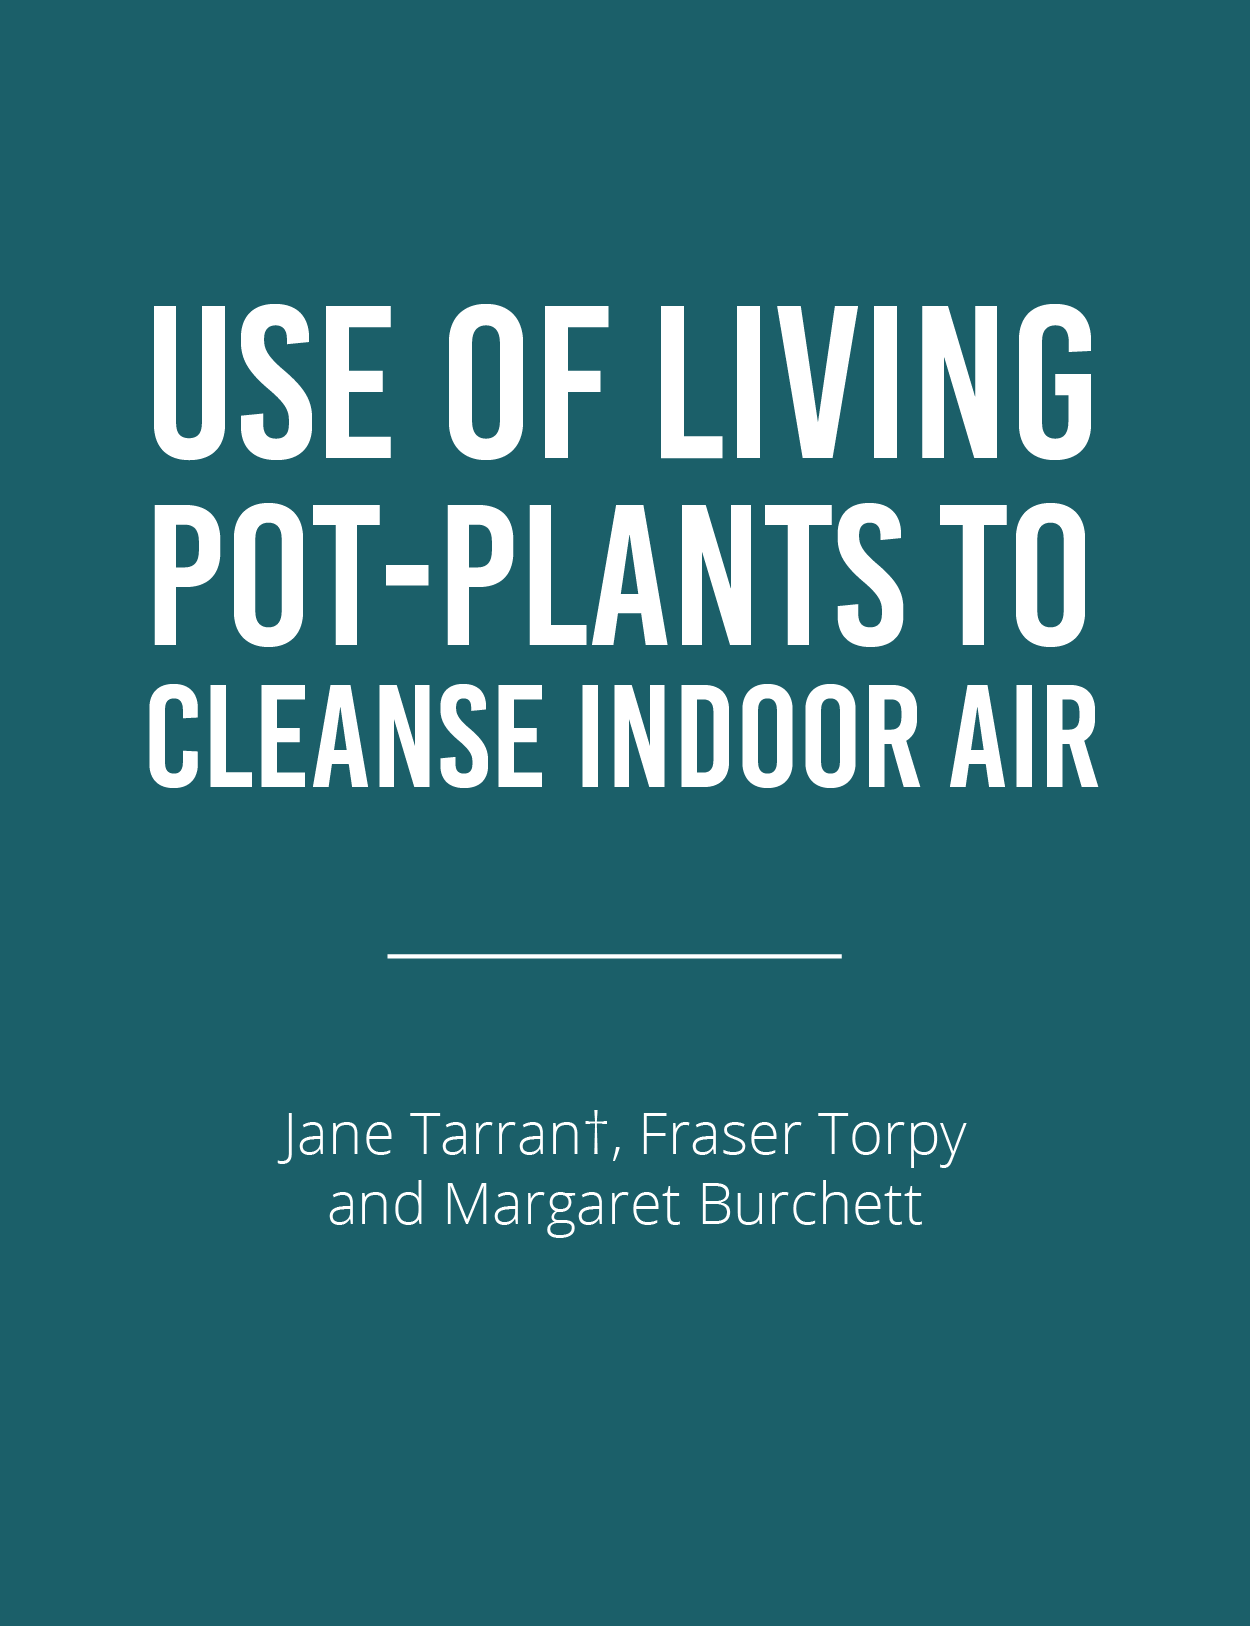 Use of Indoor Pot Plants to Cleanse Indoor AirFeatured Image